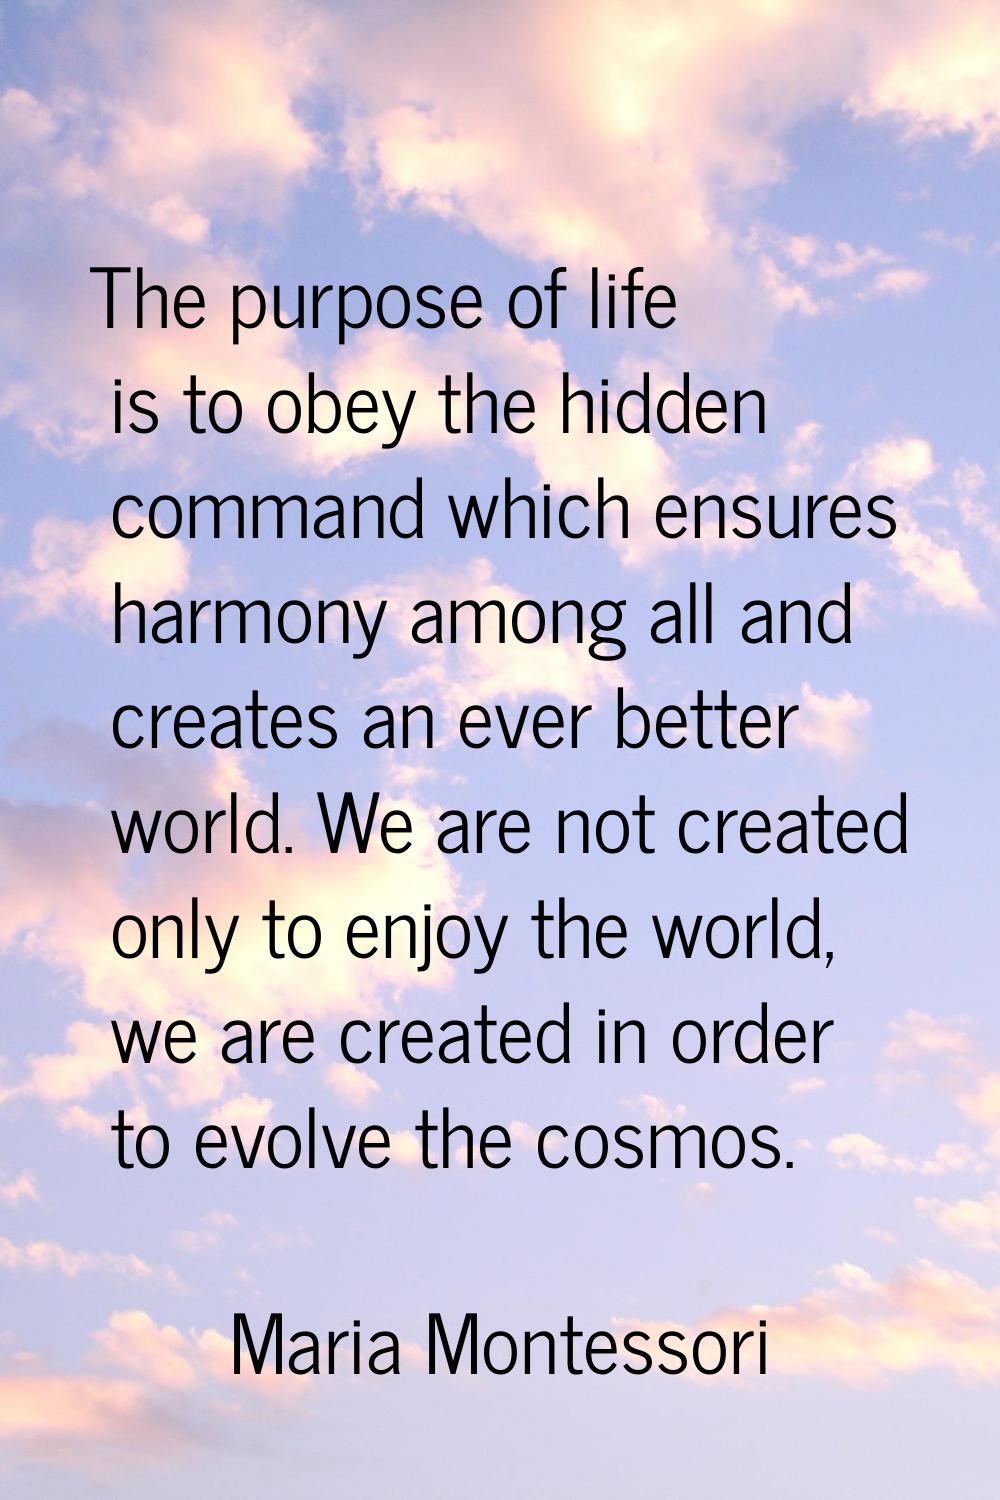 The purpose of life is to obey the hidden command which ensures harmony among all and creates an ev